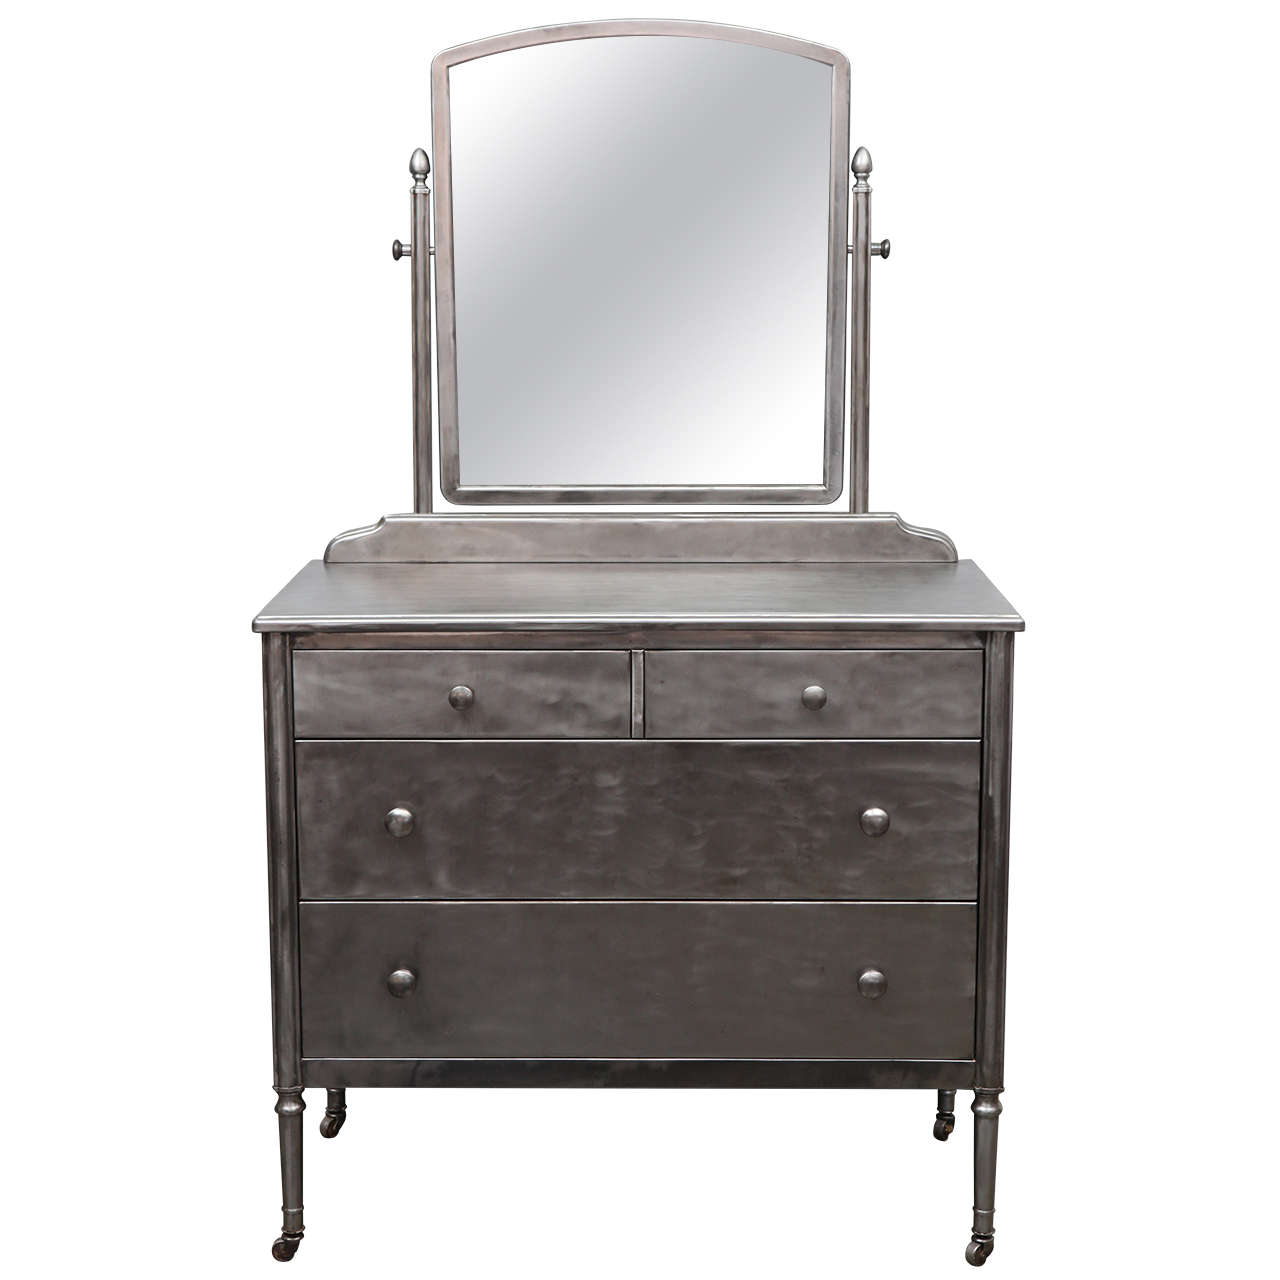 1930's Simmons Furniture Chest of Drawers w/Mirror